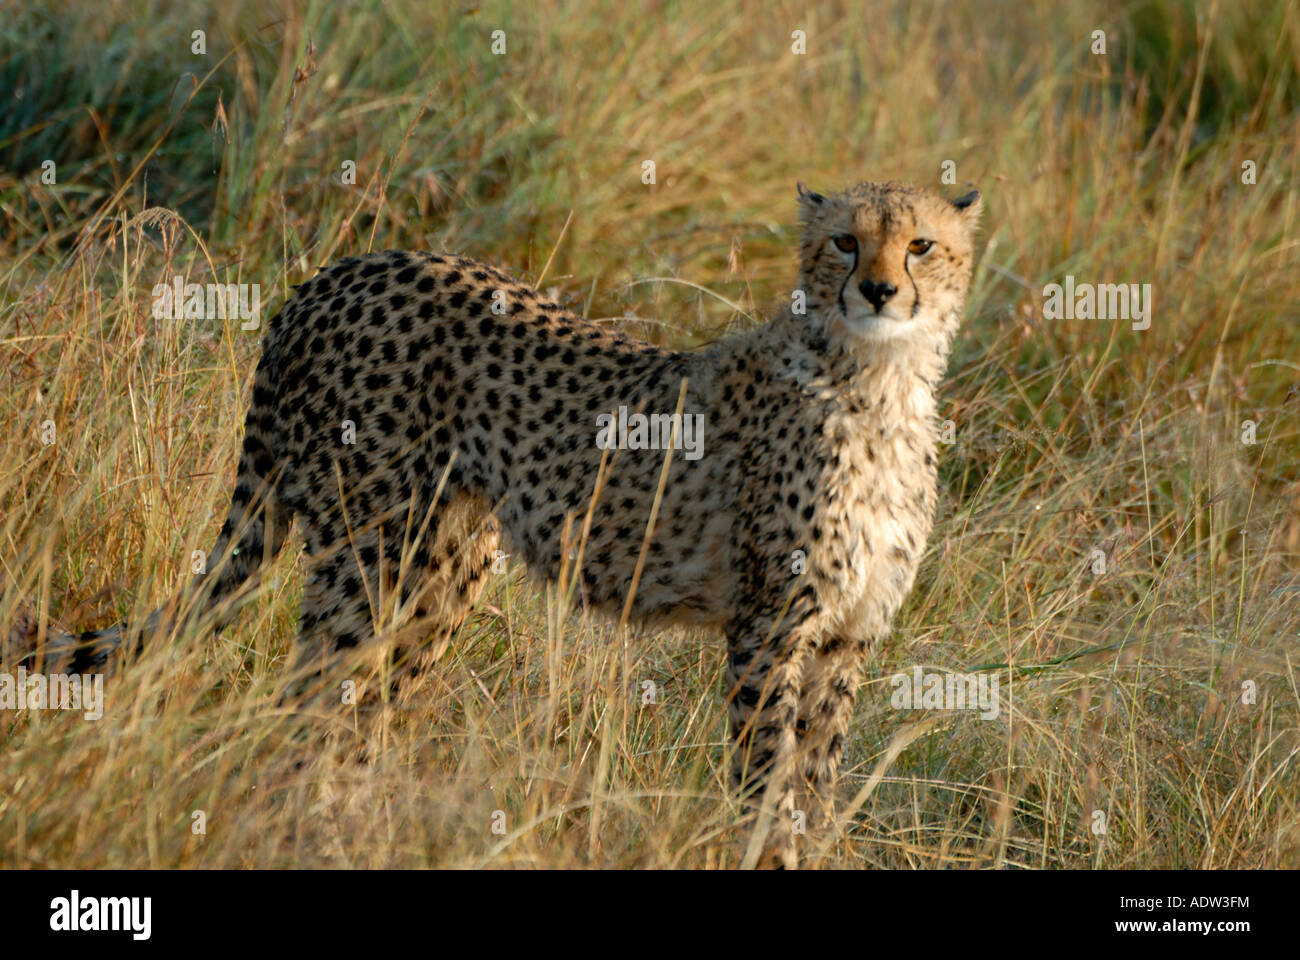 A young cheetah in the Masai Mara National Reserve Kenya East Africa It is almost fully grown being about one year old Stock Photo